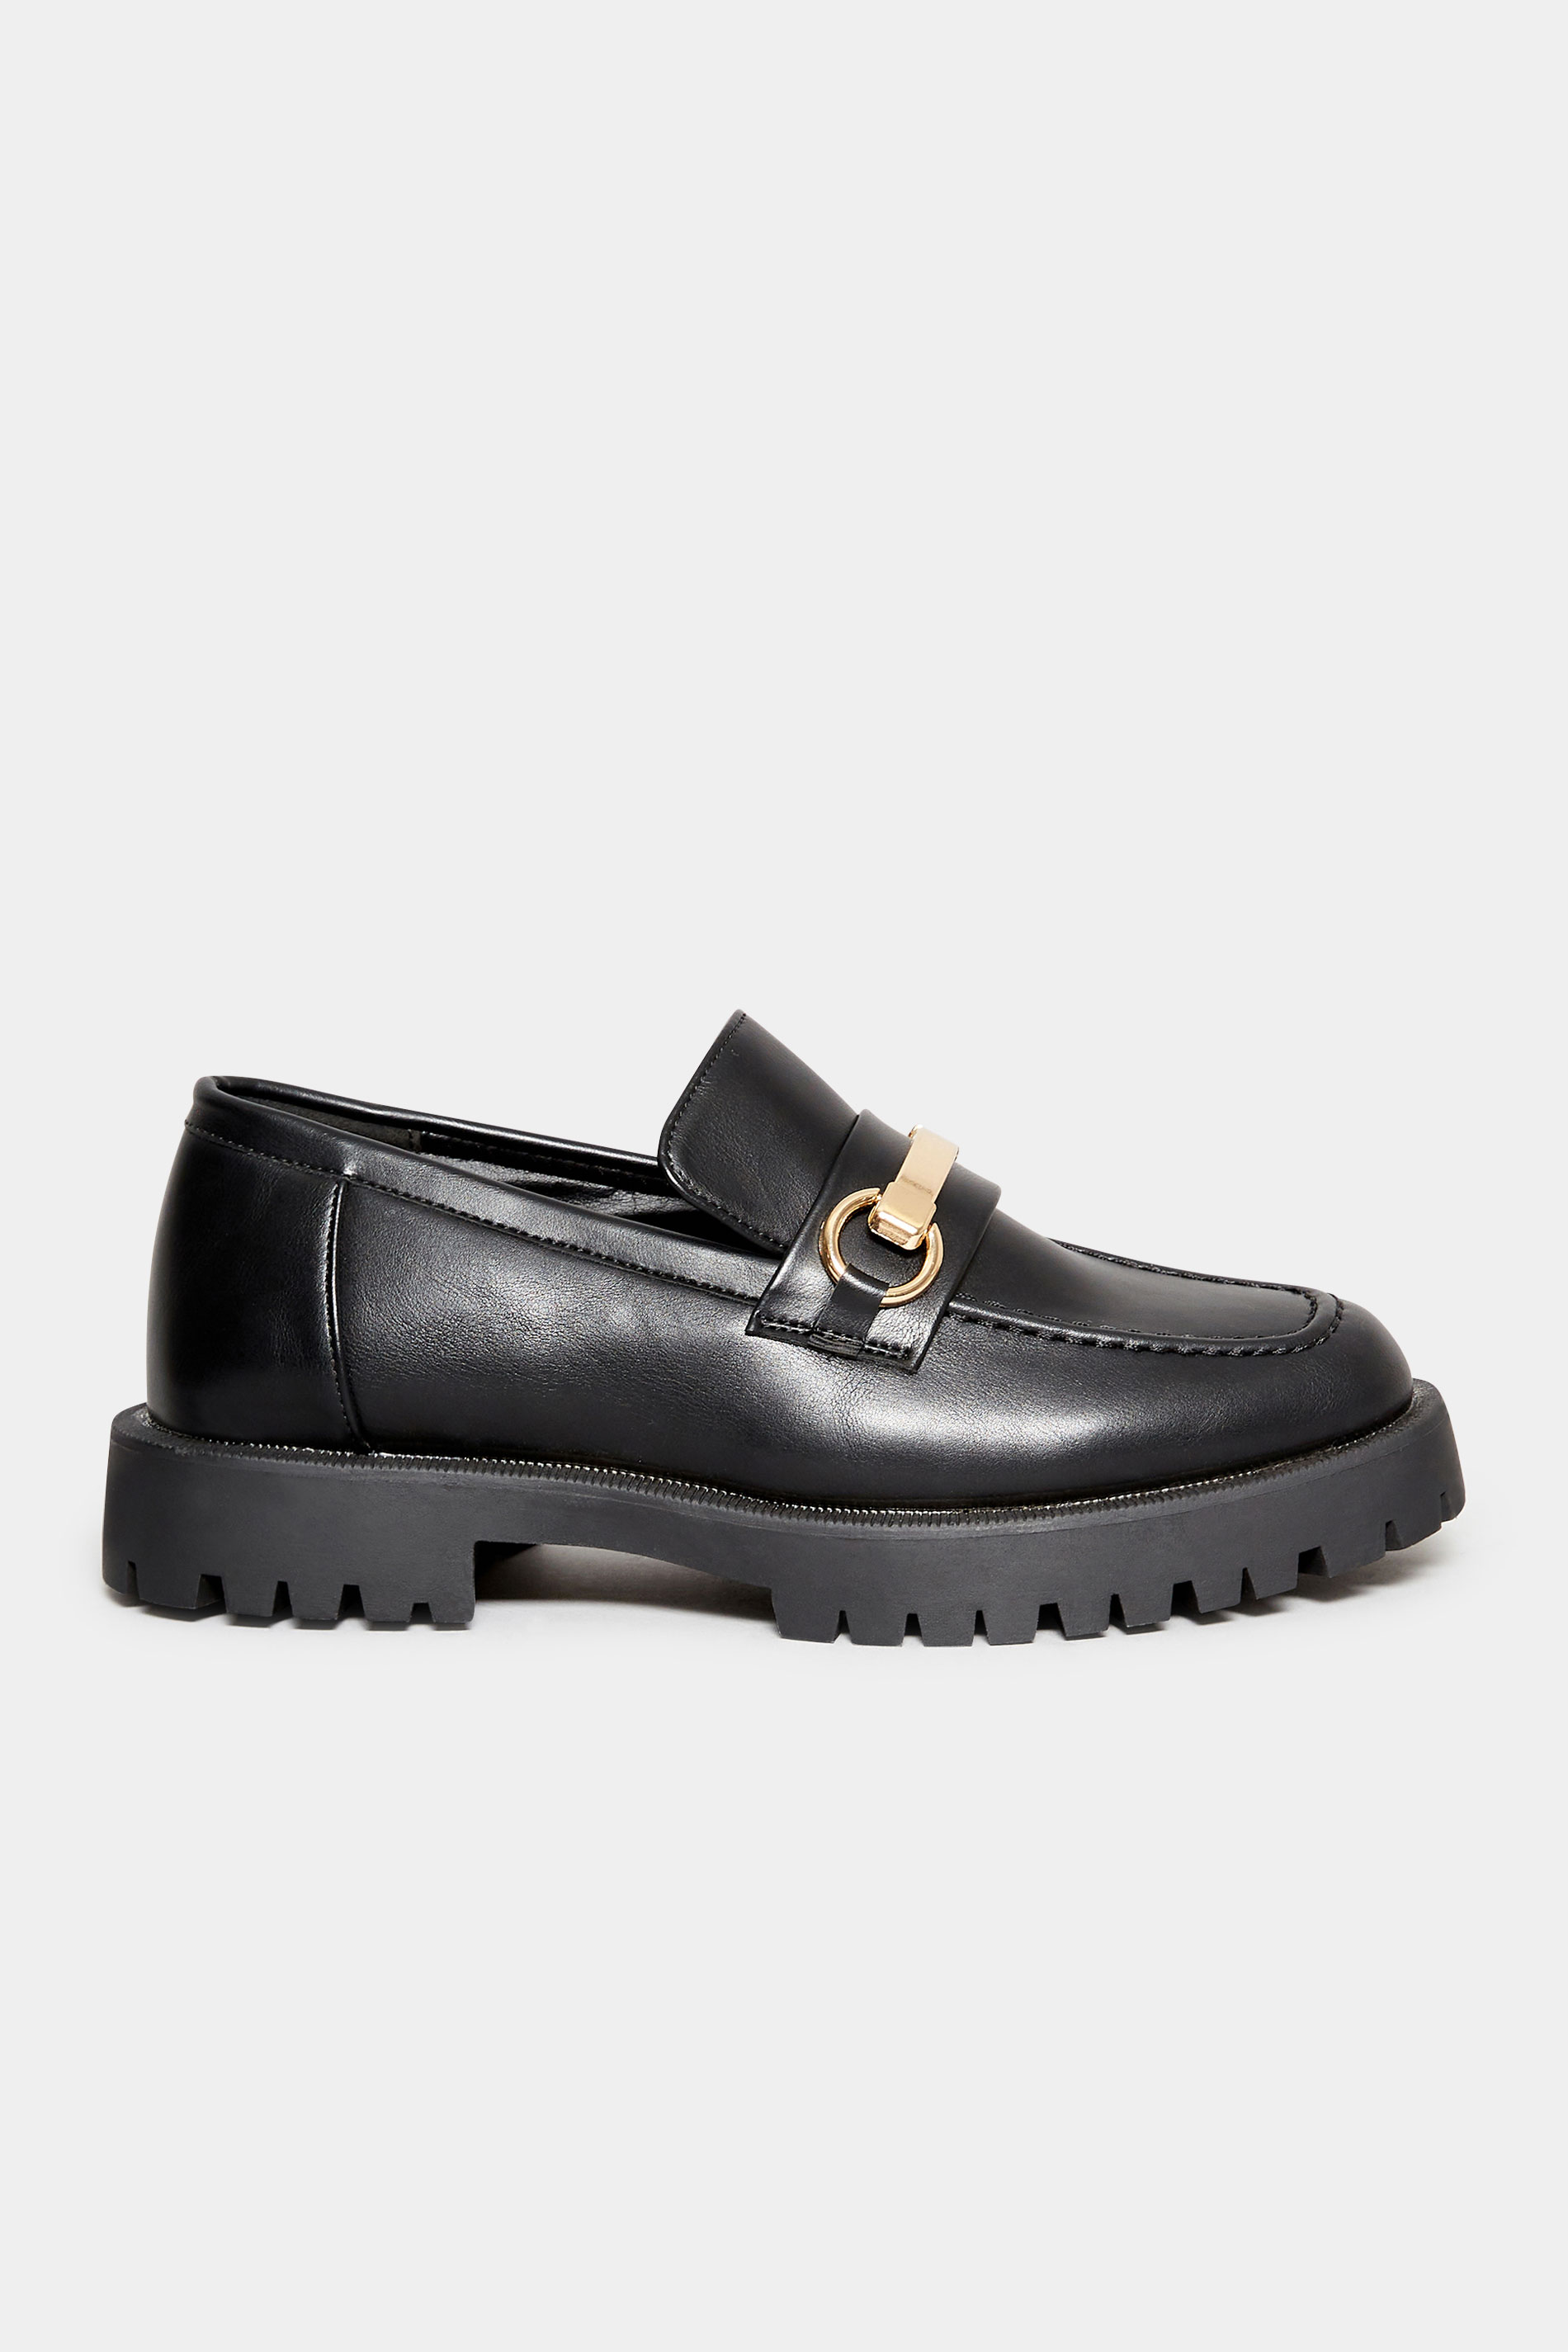 LIMITED COLLECTION Black & Gold Hardware Chunky Loafers In Wide E Fit ...